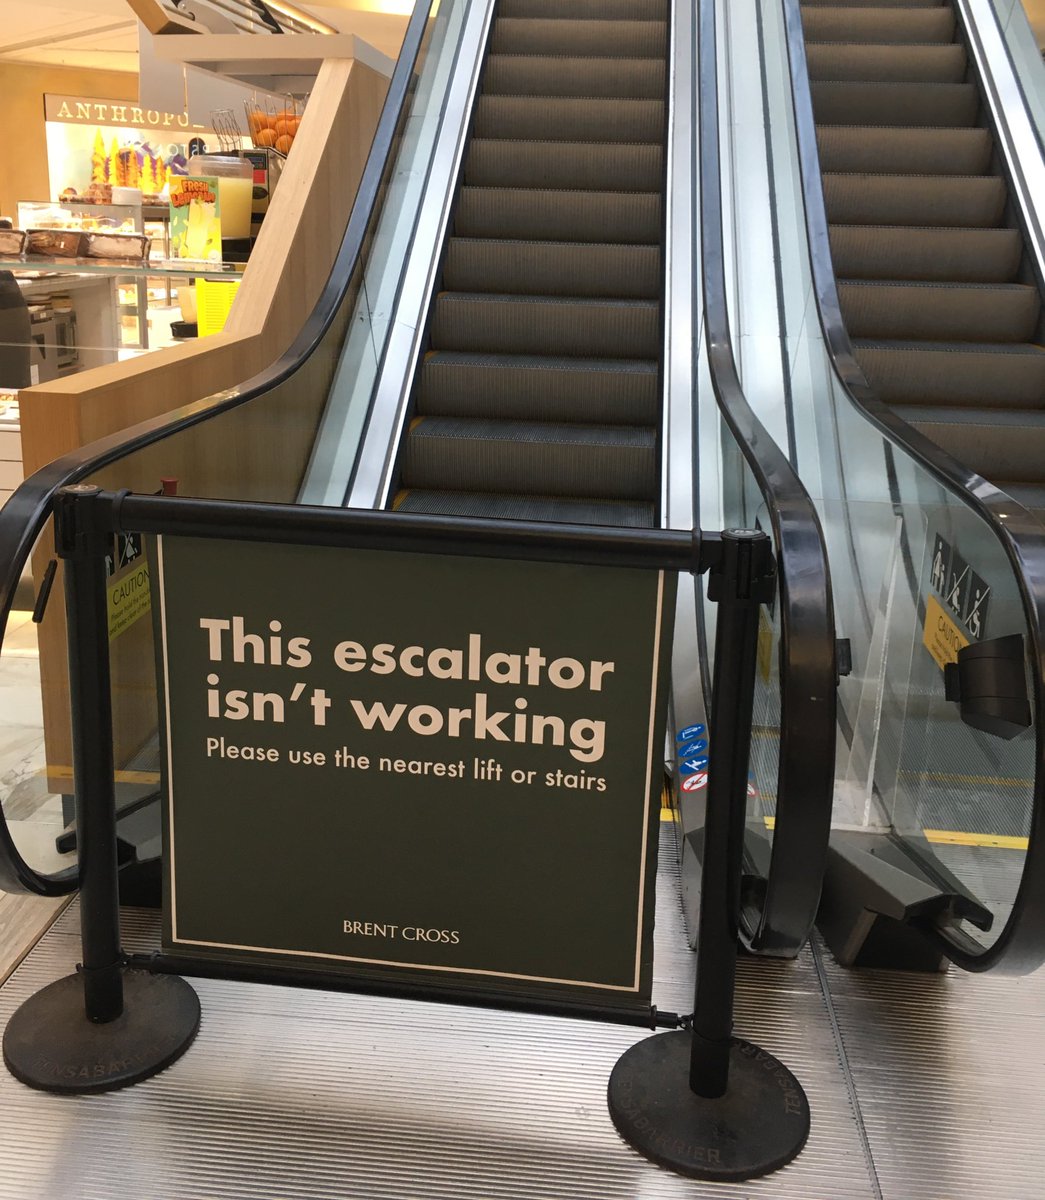 Hi @brentcross_sc. You know that when an escalator isn’t working it still functions as a staircase, right?